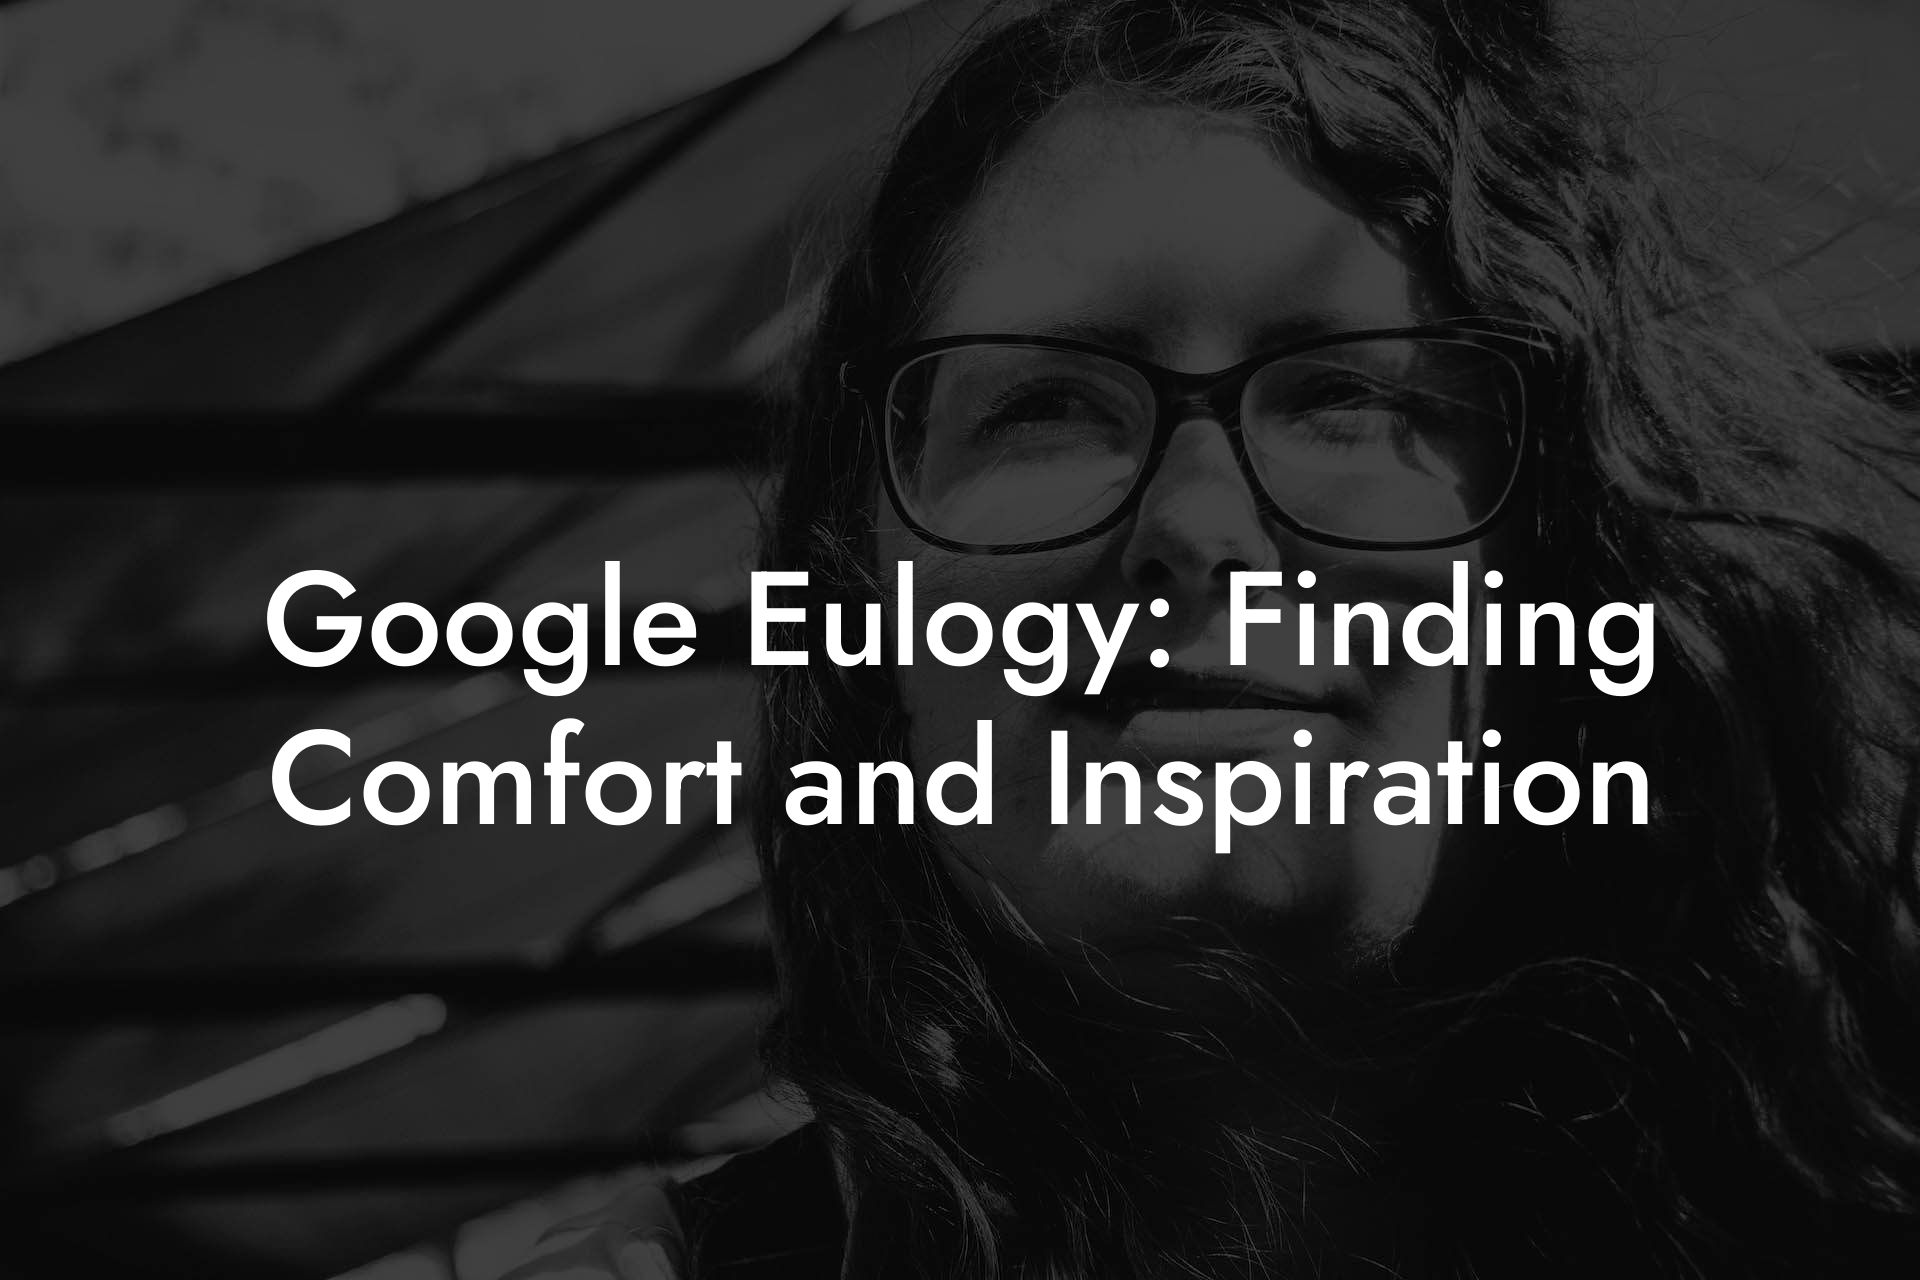 Google Eulogy: Finding Comfort and Inspiration